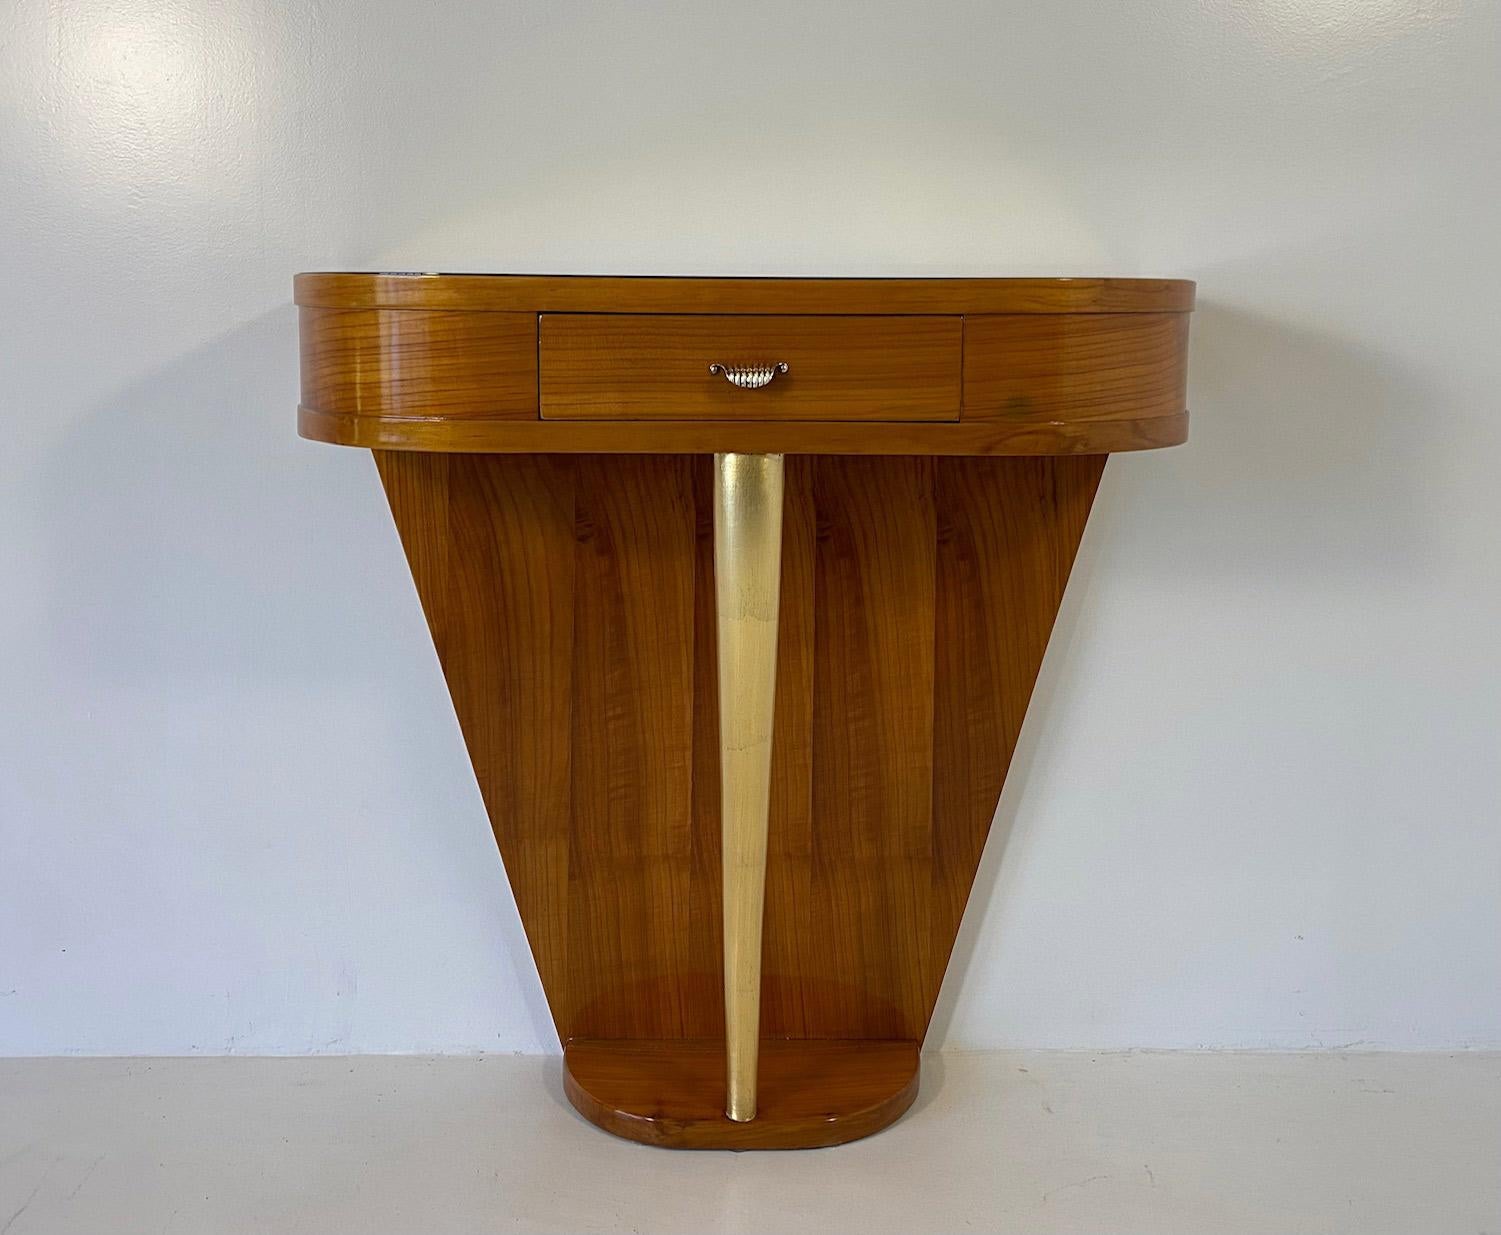 This elegant console was produced in Italy in the 1940s, with a style and a design that clearly remind the creations of the Italian designer Paolo Buffa.   The console is completely made of Cherry wood, the exceptions are the top, which is a good